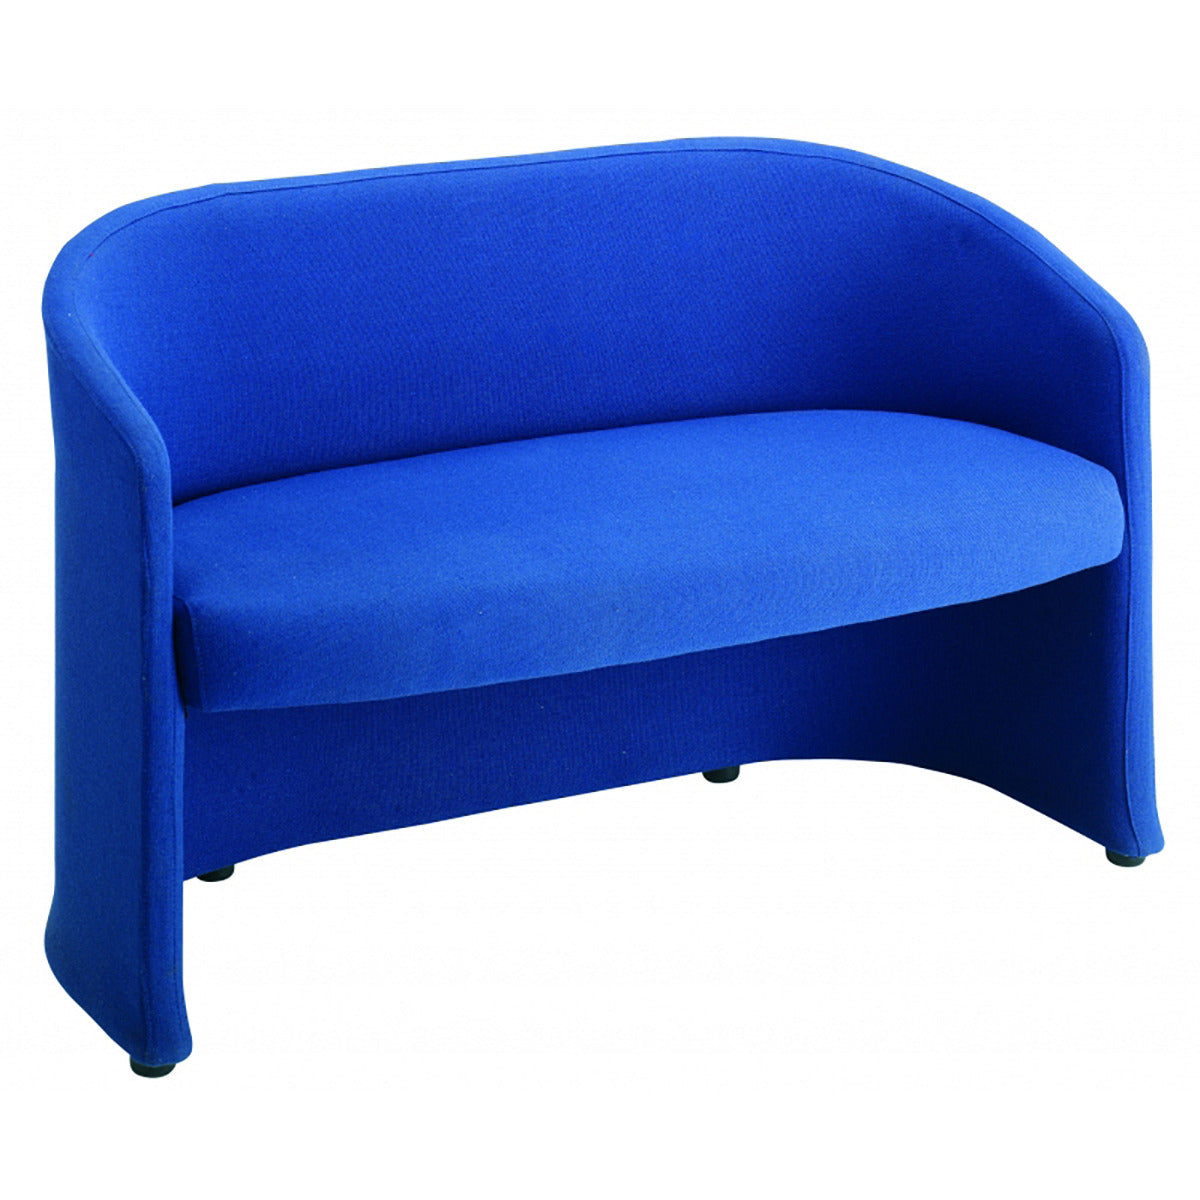 Slender Fabric Sofa - Black or Blue - 1 & 2 Seater Available